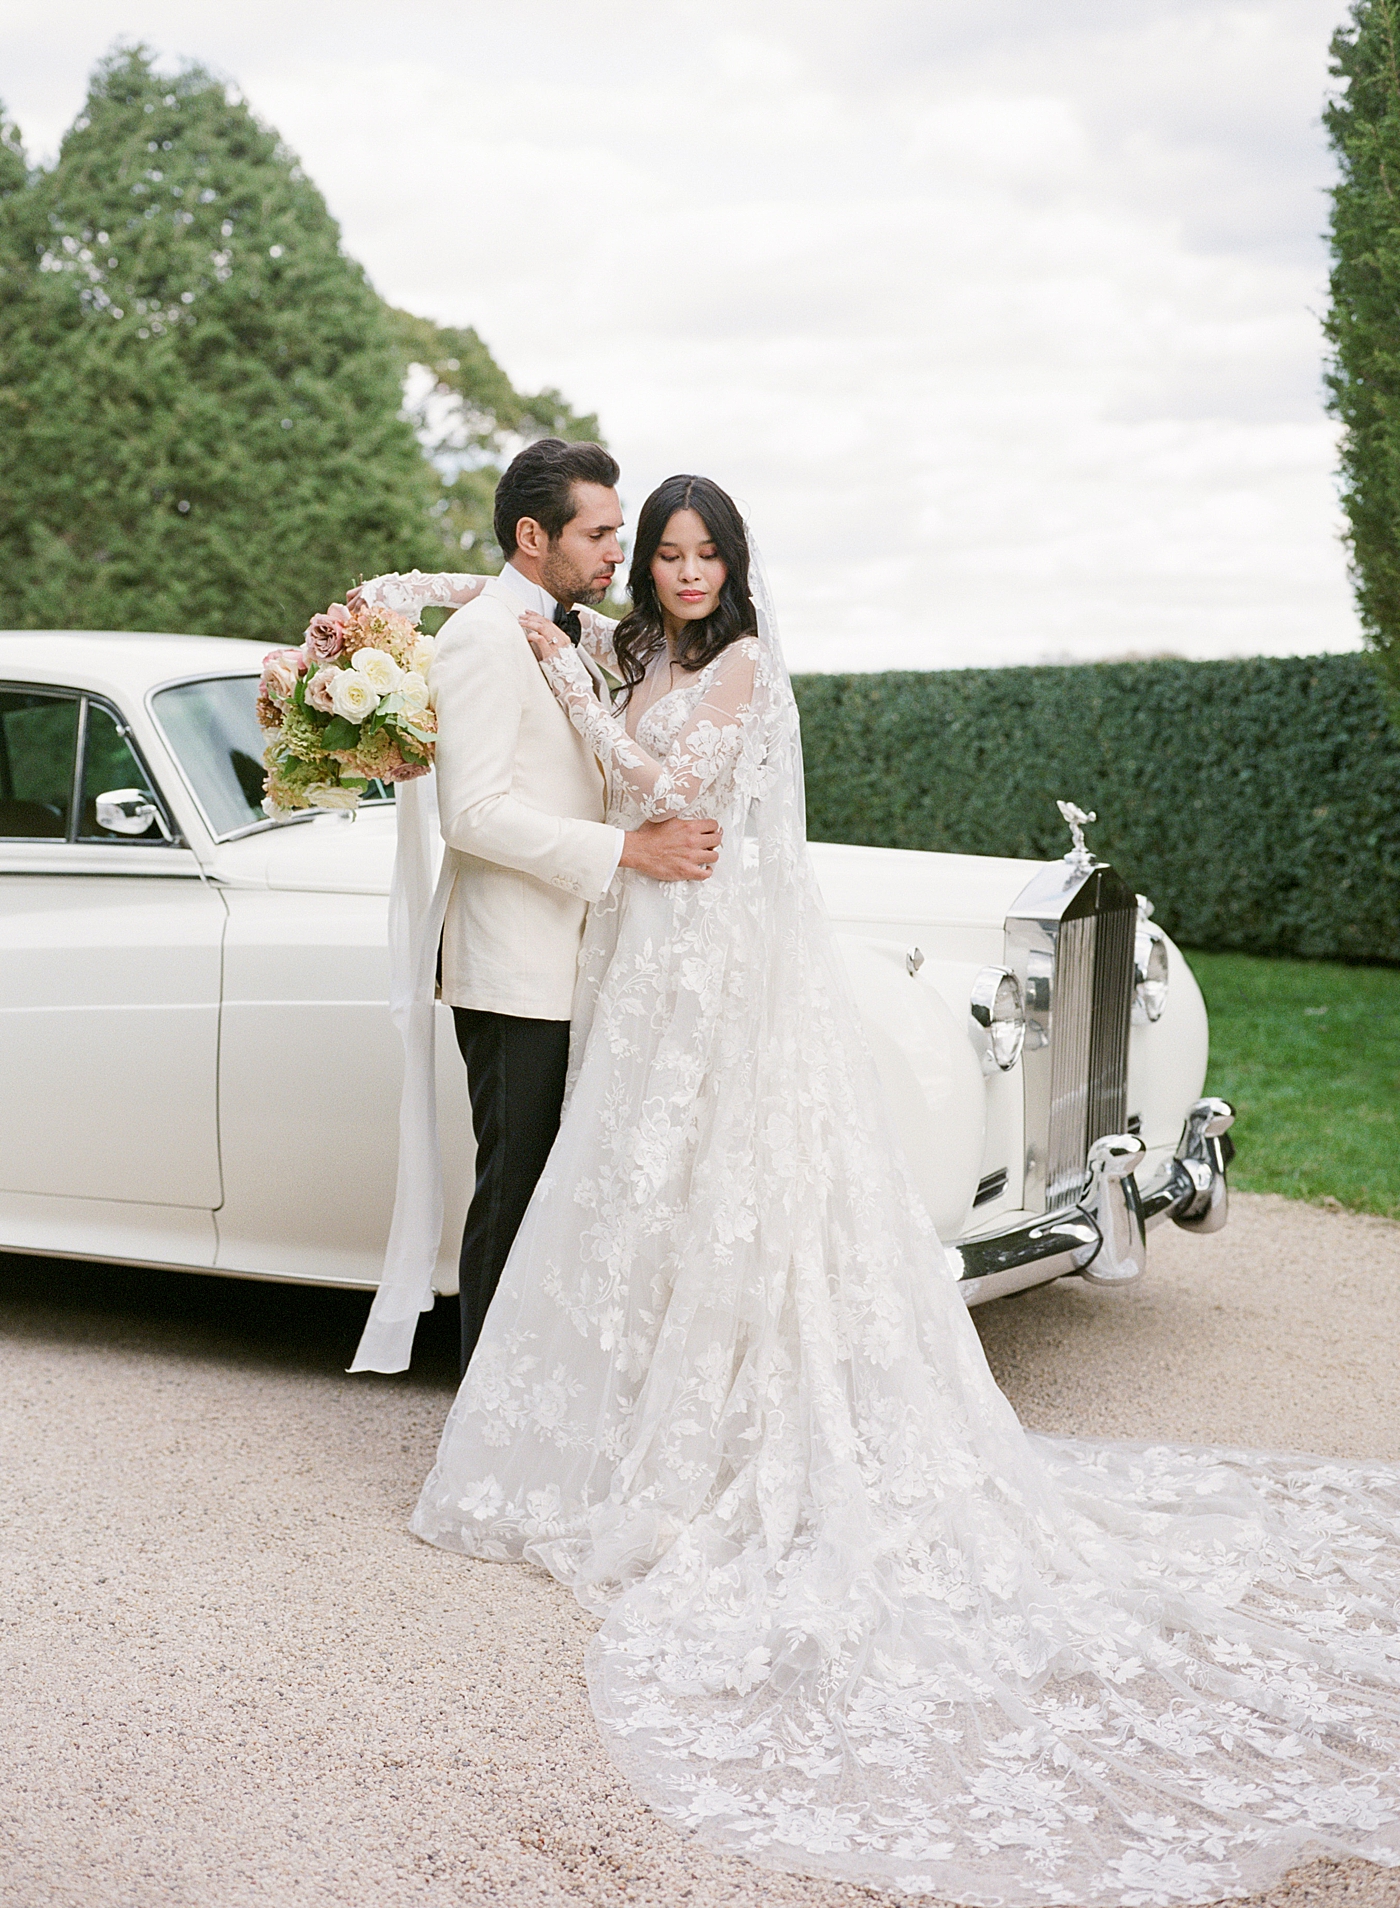 Bride and groom embracing by a classic car in a gravel driveway during Oheka castle wedding | Image by Hope Helmuth Photography